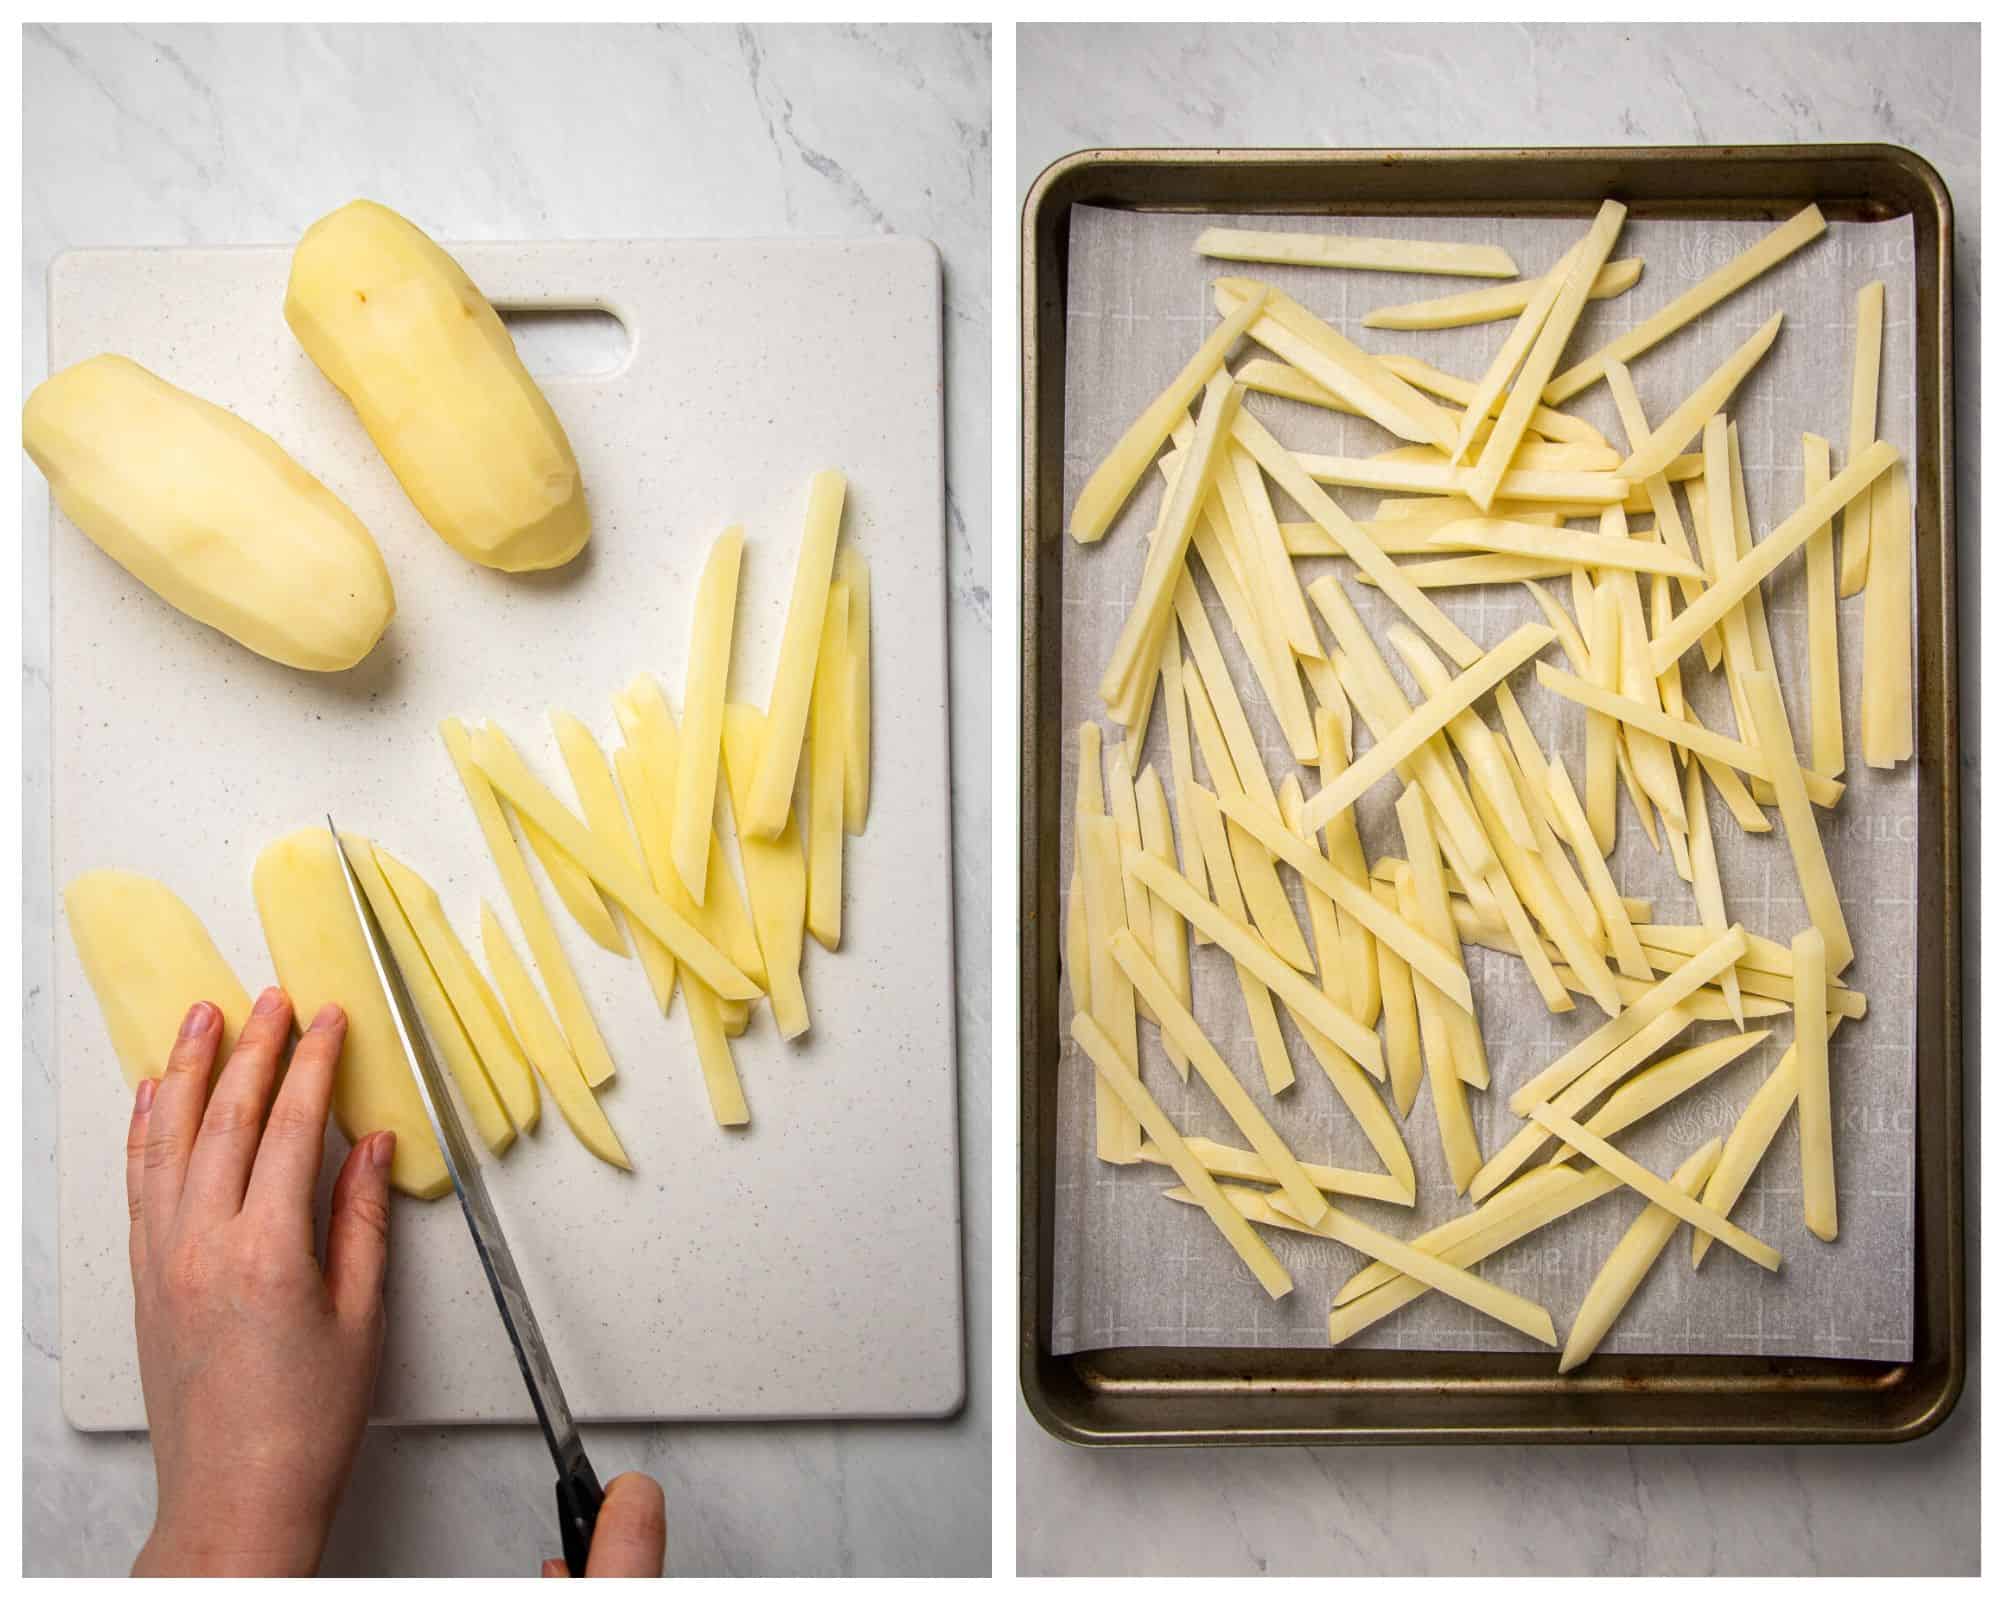 process photos of how to make baked fries.